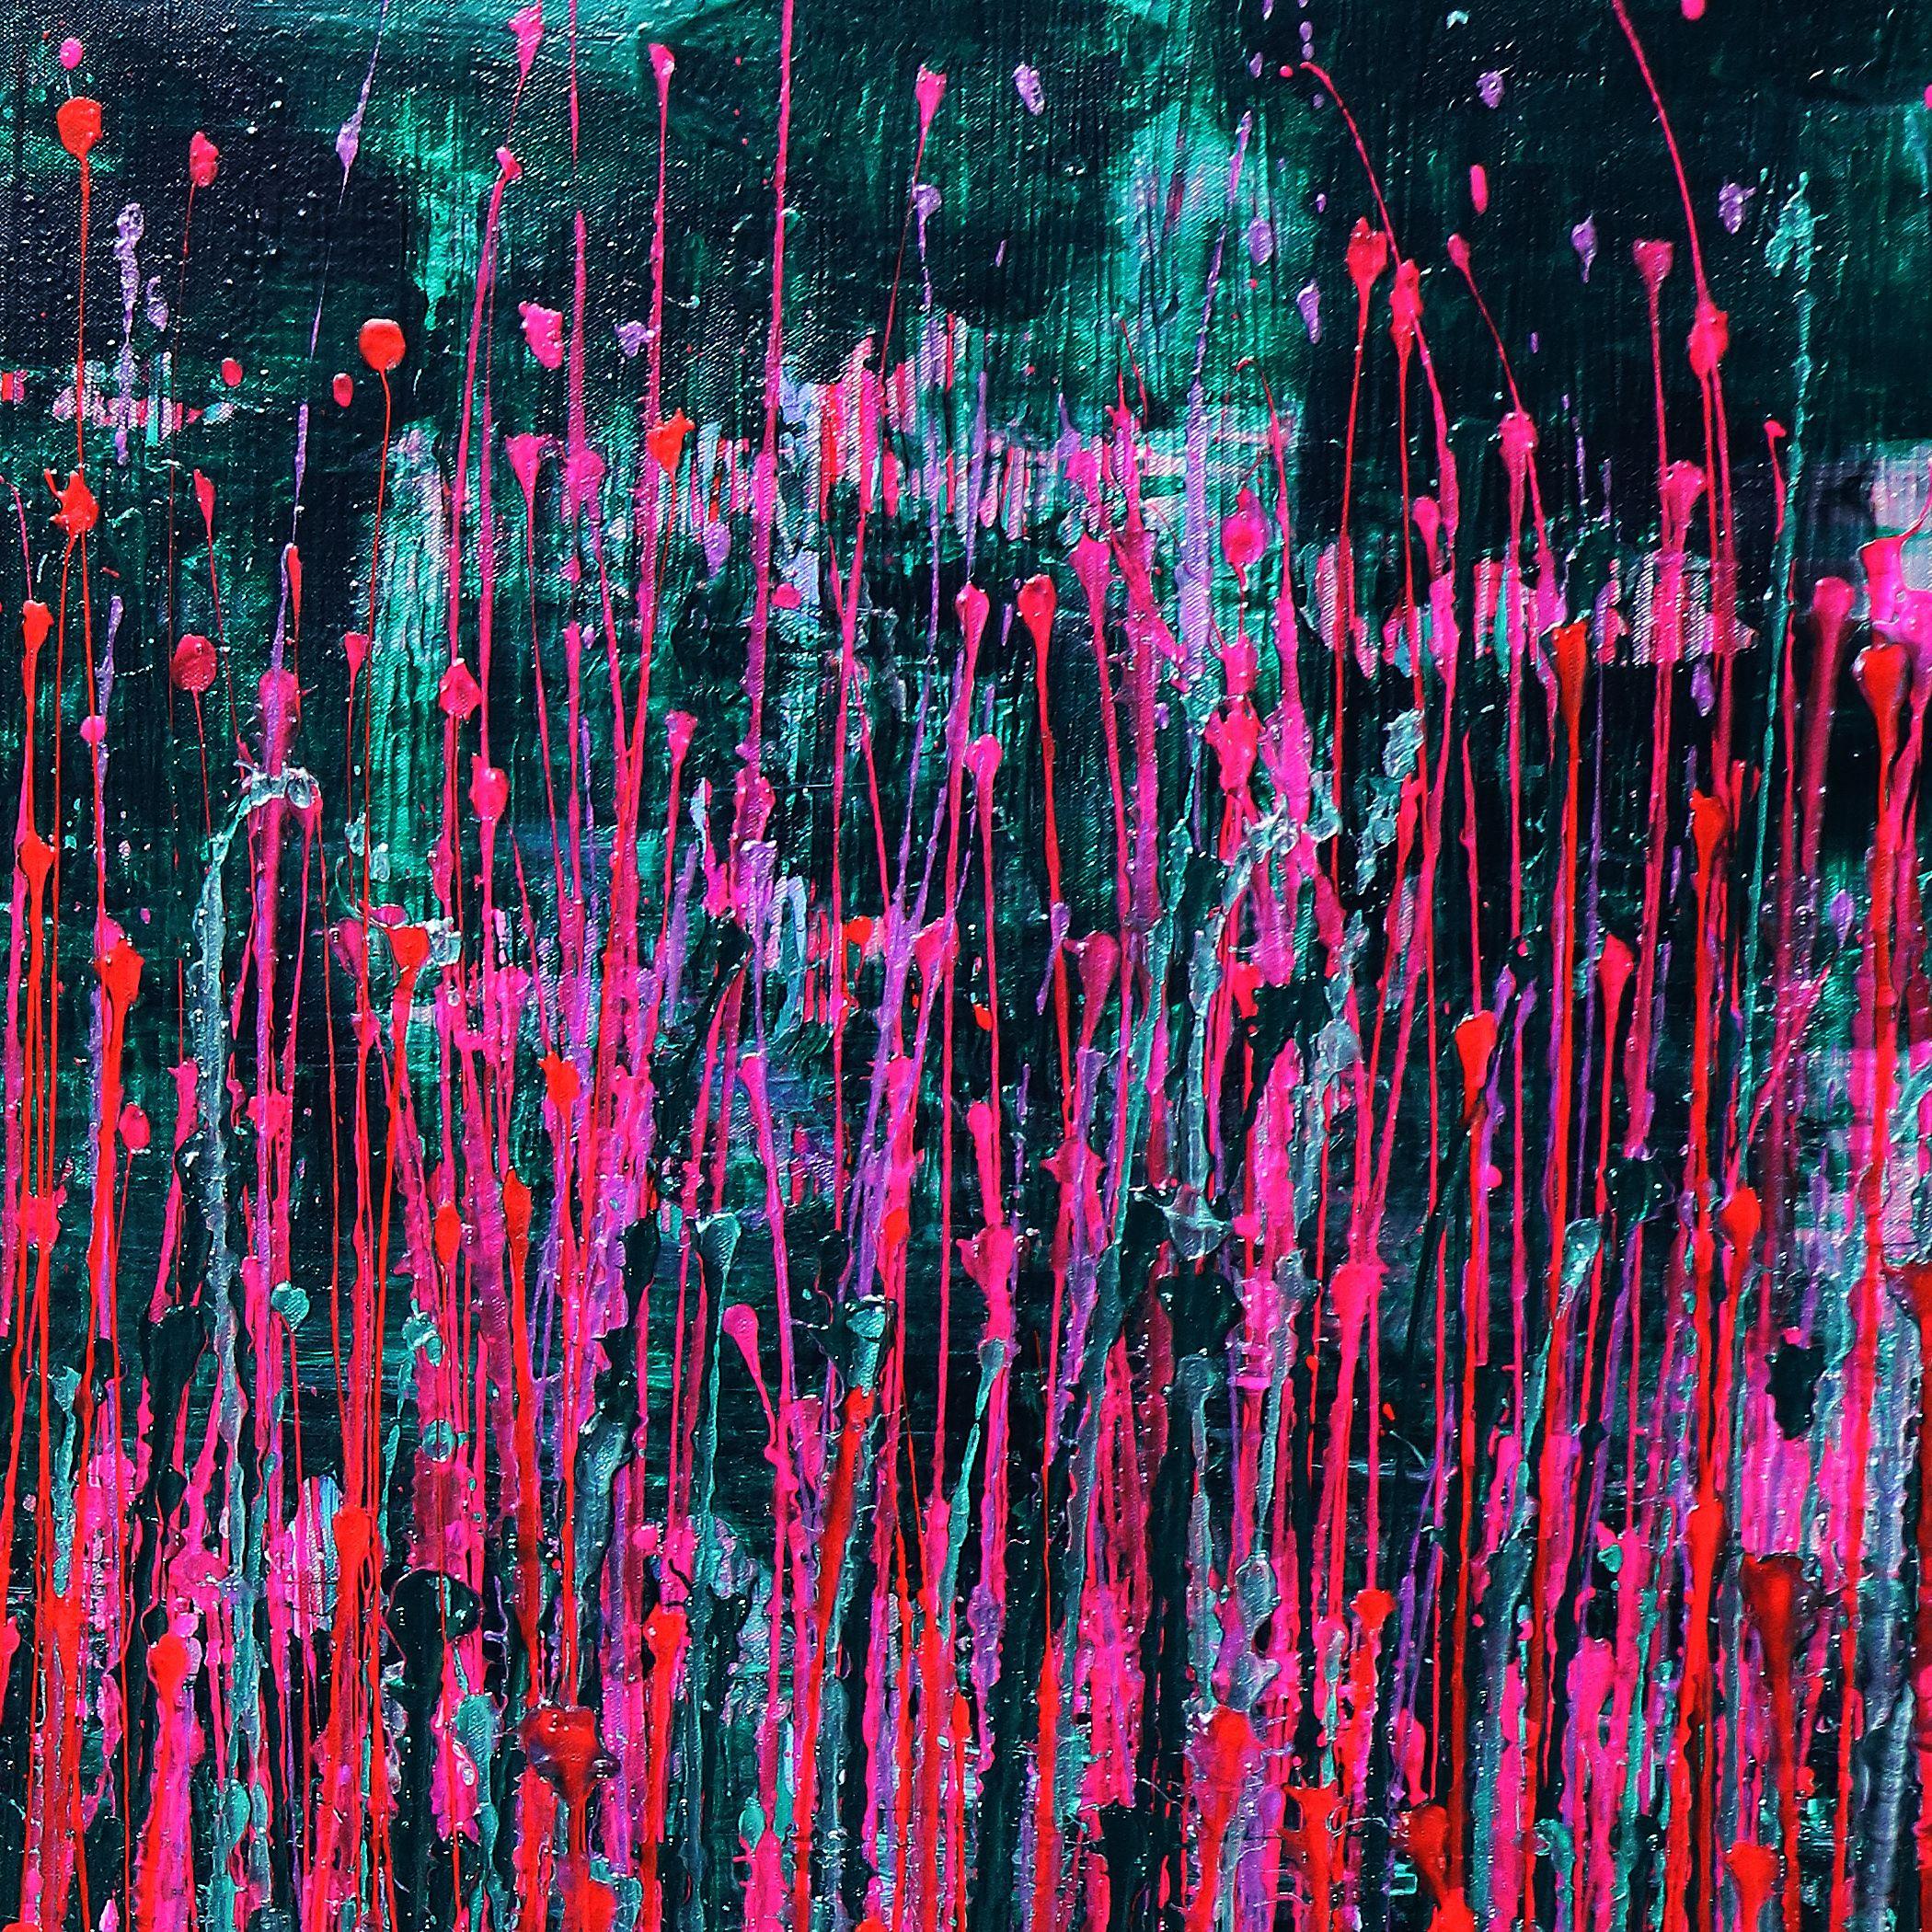 Pink synergy (Fantasy garden), Painting, Acrylic on Canvas - Black Abstract Painting by Nestor Toro